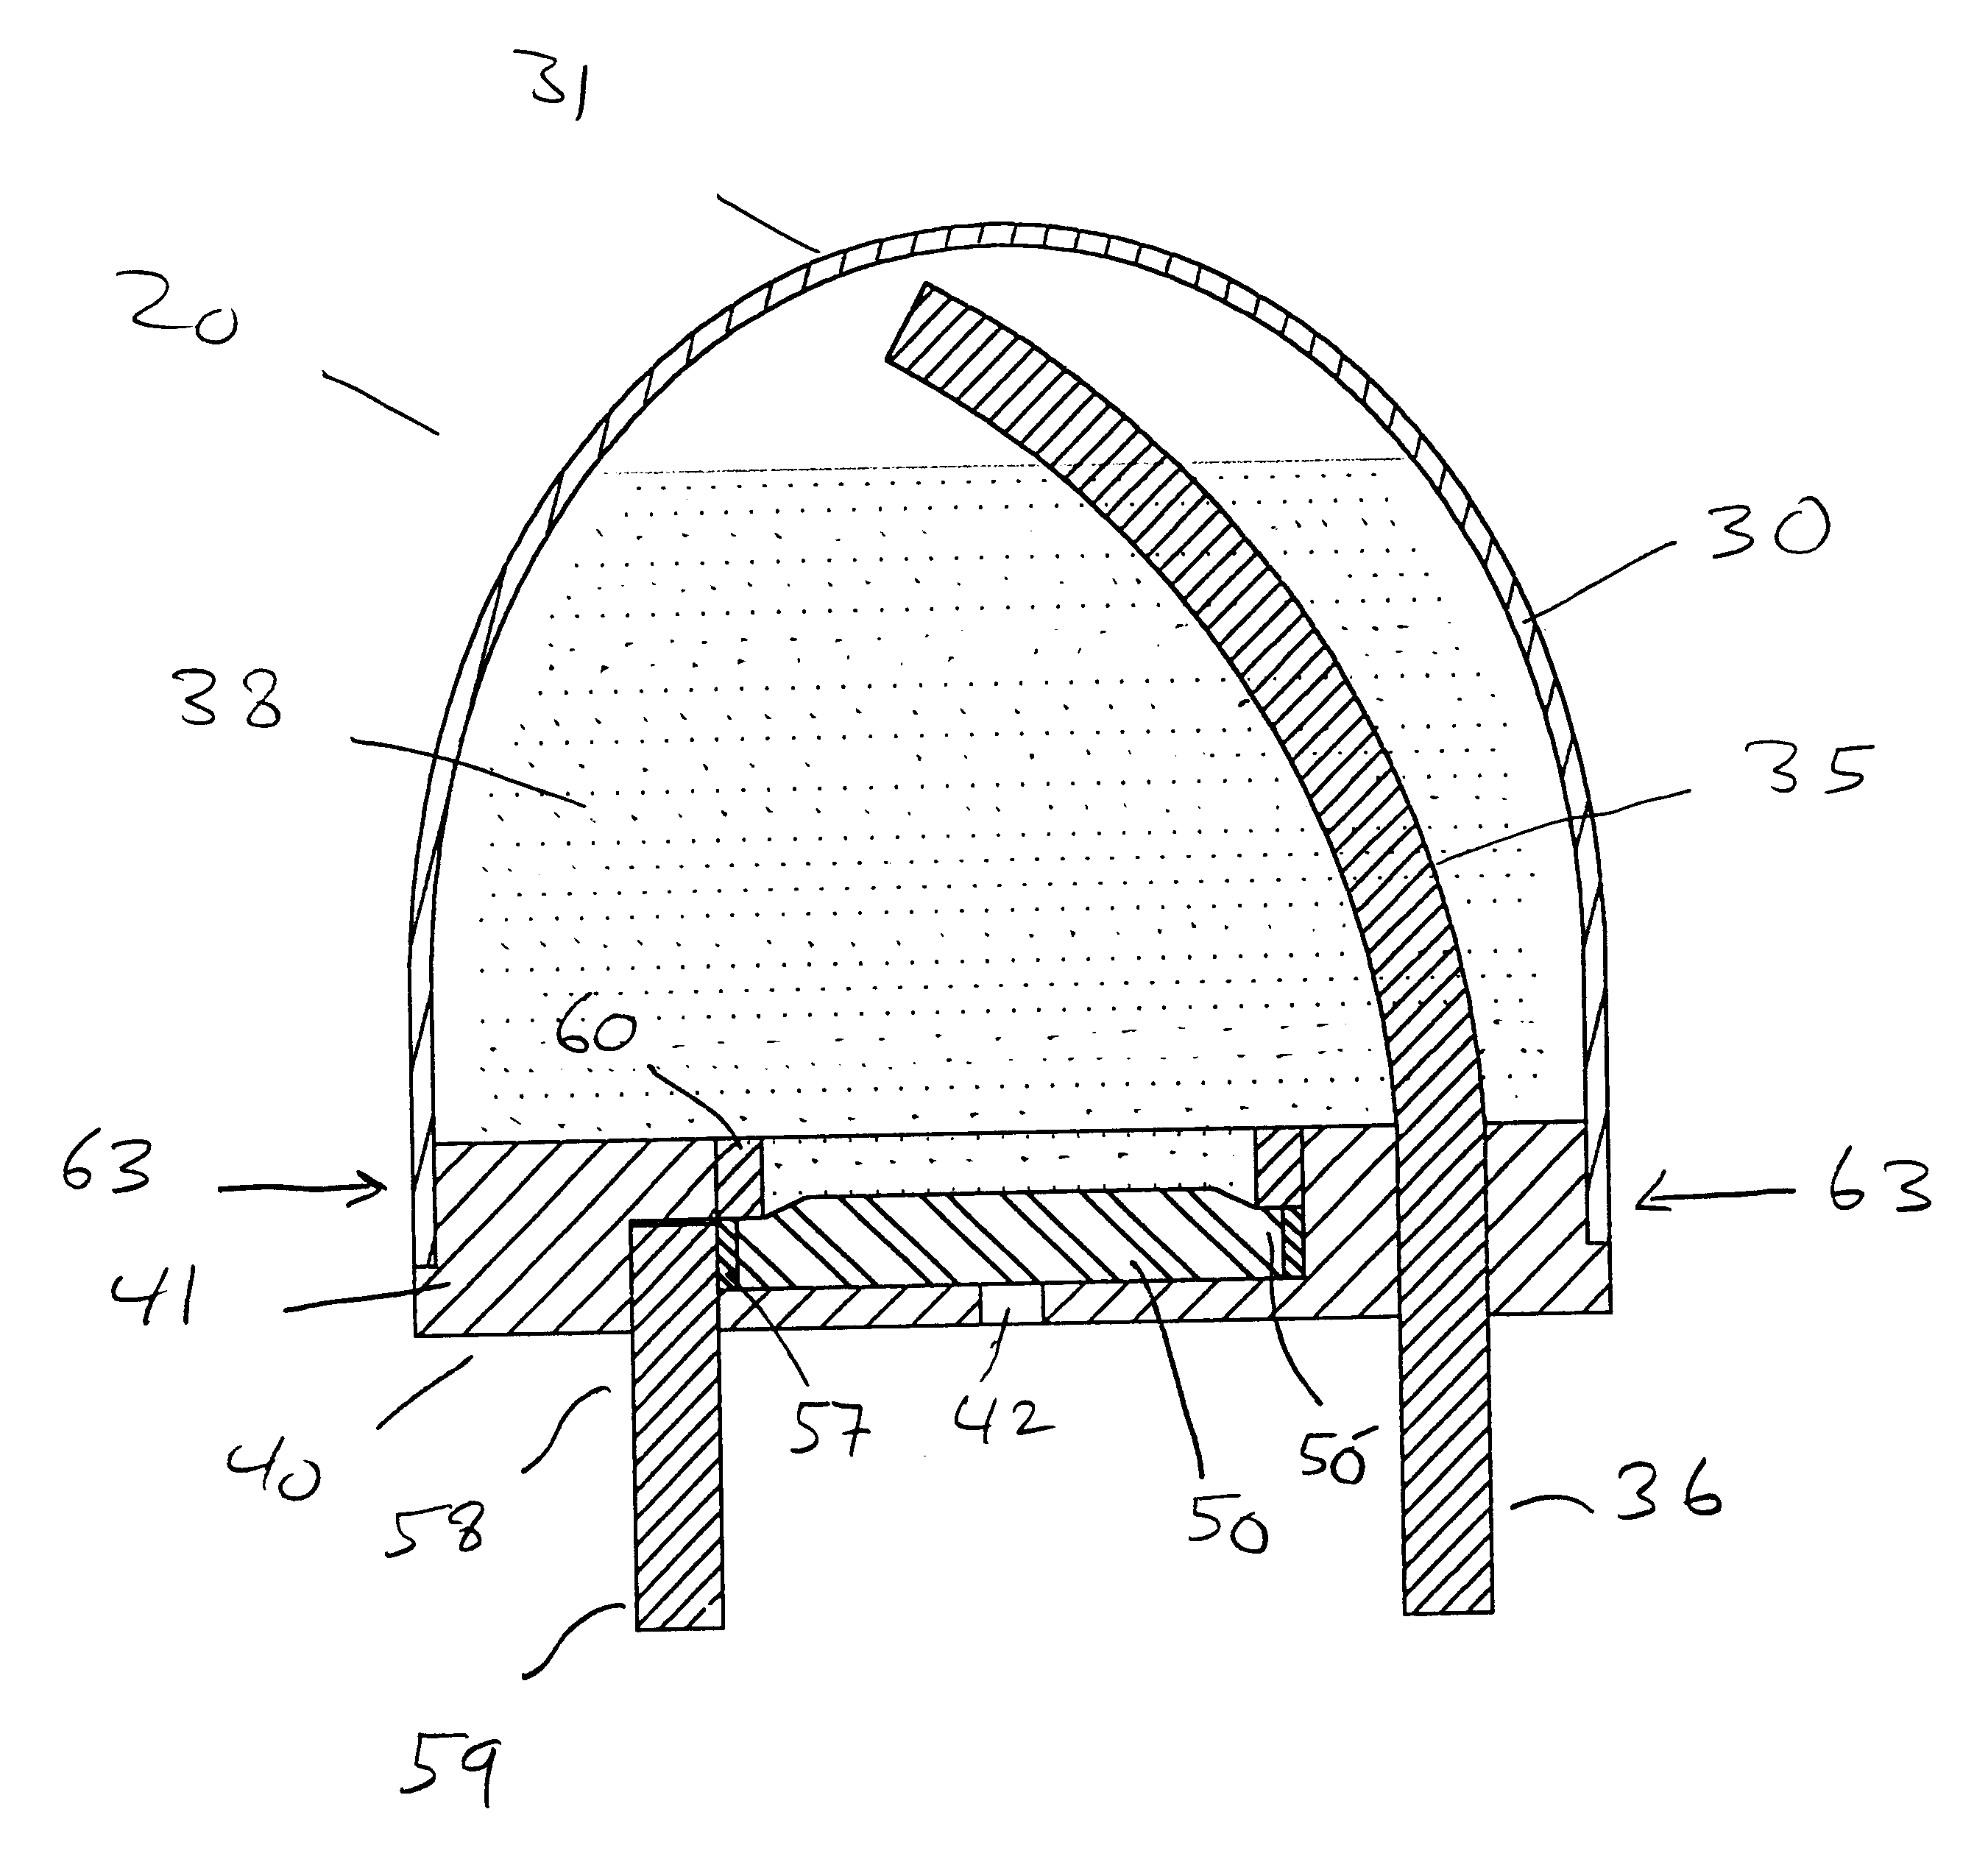 Miniature plastic battery assembly for canal hearing devices